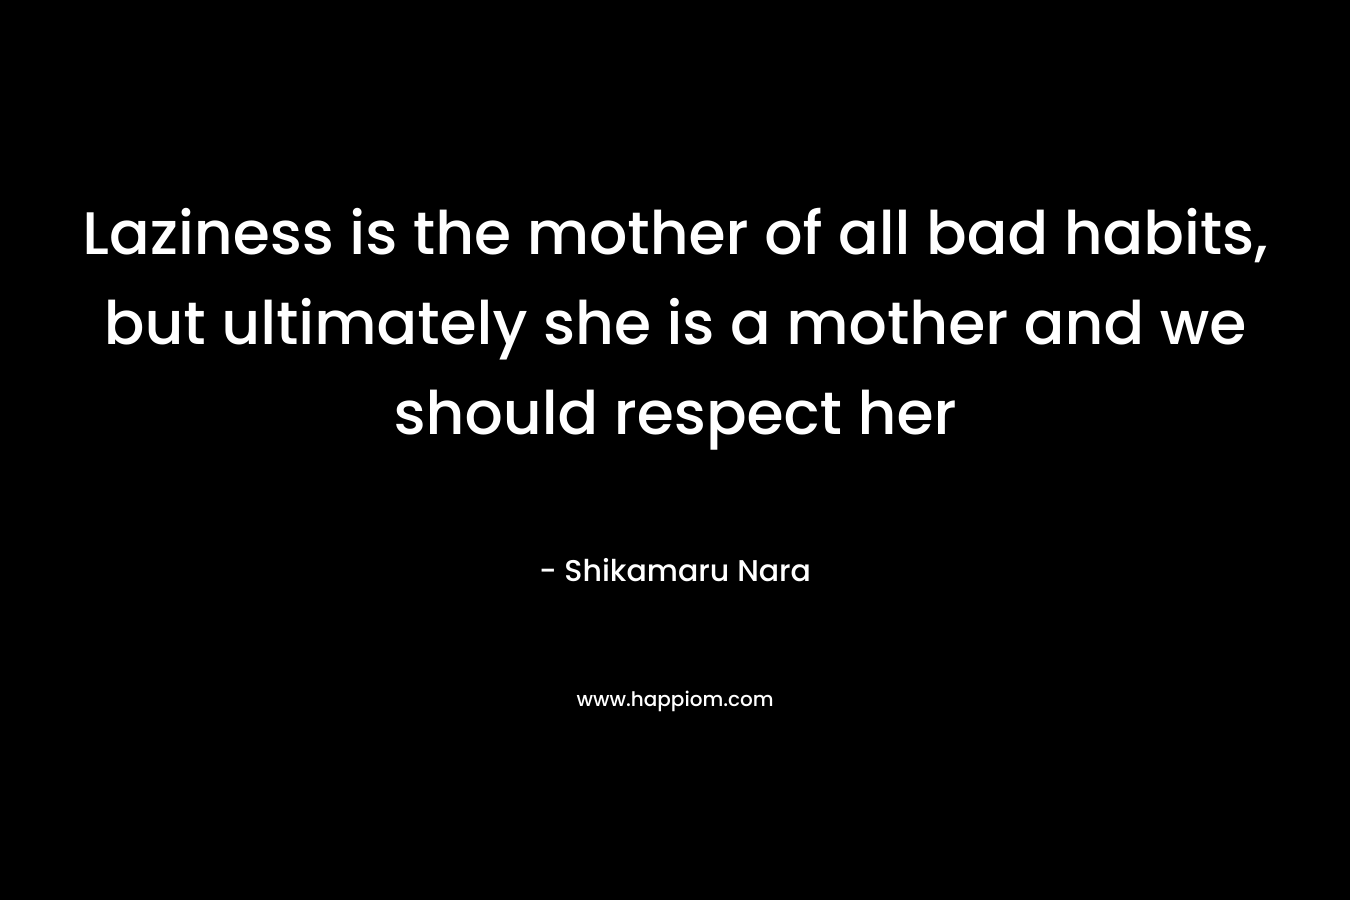 Laziness is the mother of all bad habits, but ultimately she is a mother and we should respect her – Shikamaru Nara